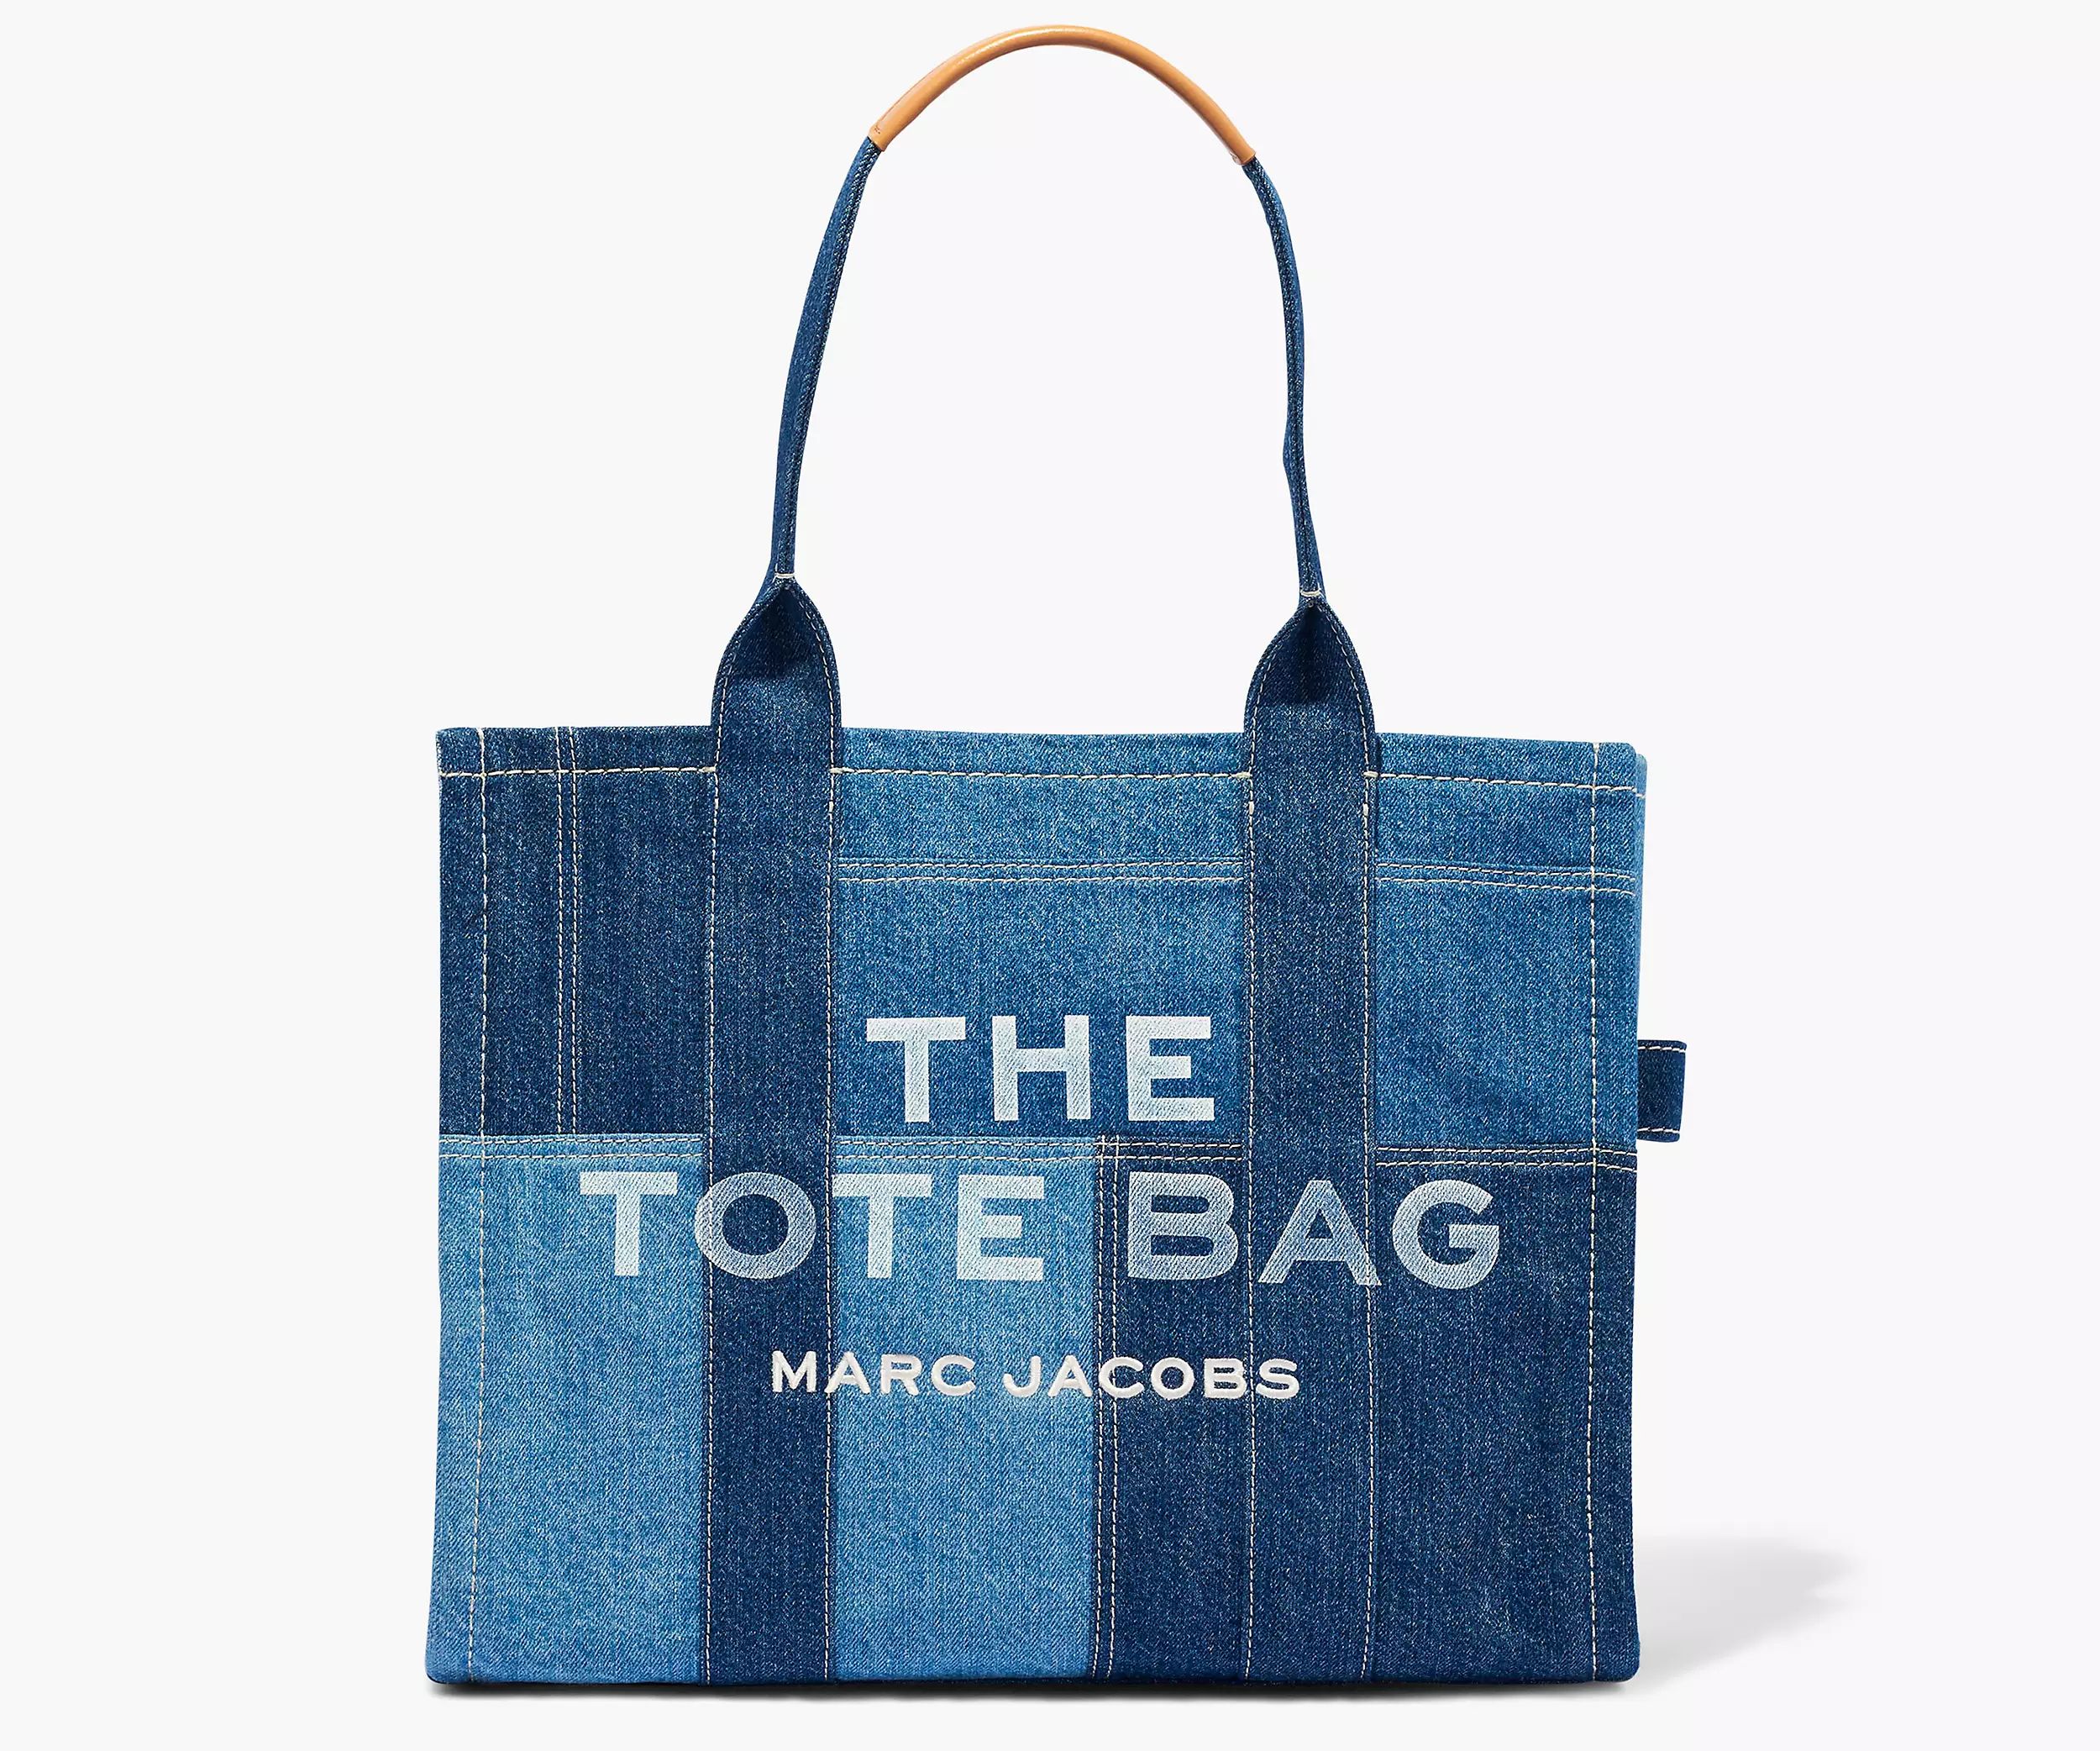 The Denim Large Tote Bag | Marc Jacobs